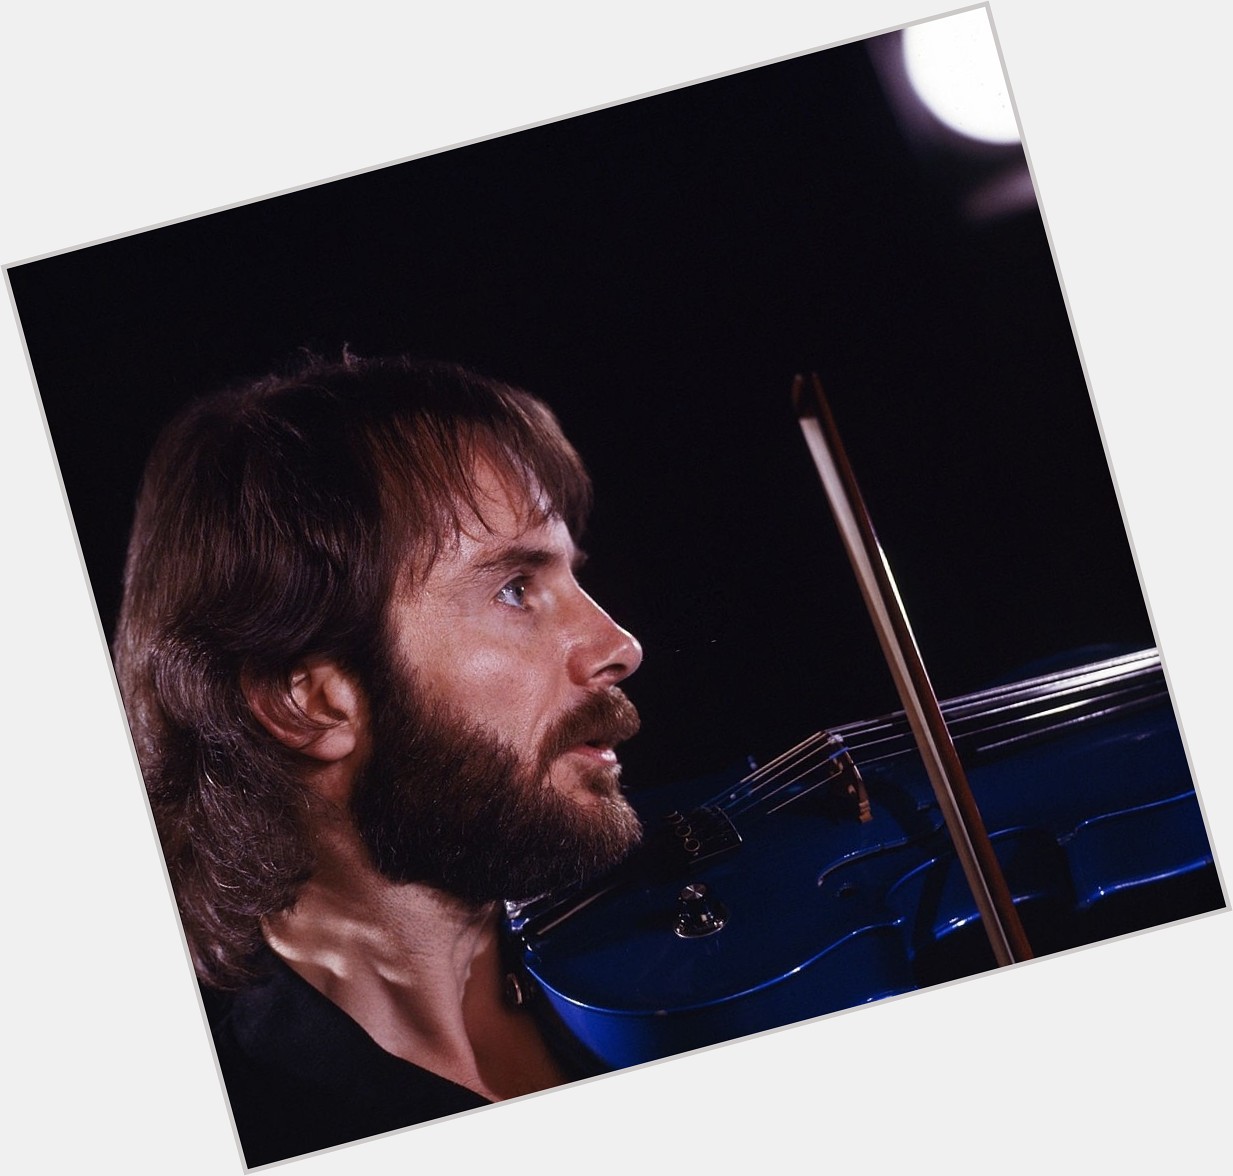 Happy Birthday to Jean-Luc Ponty who turns 79 years young today 